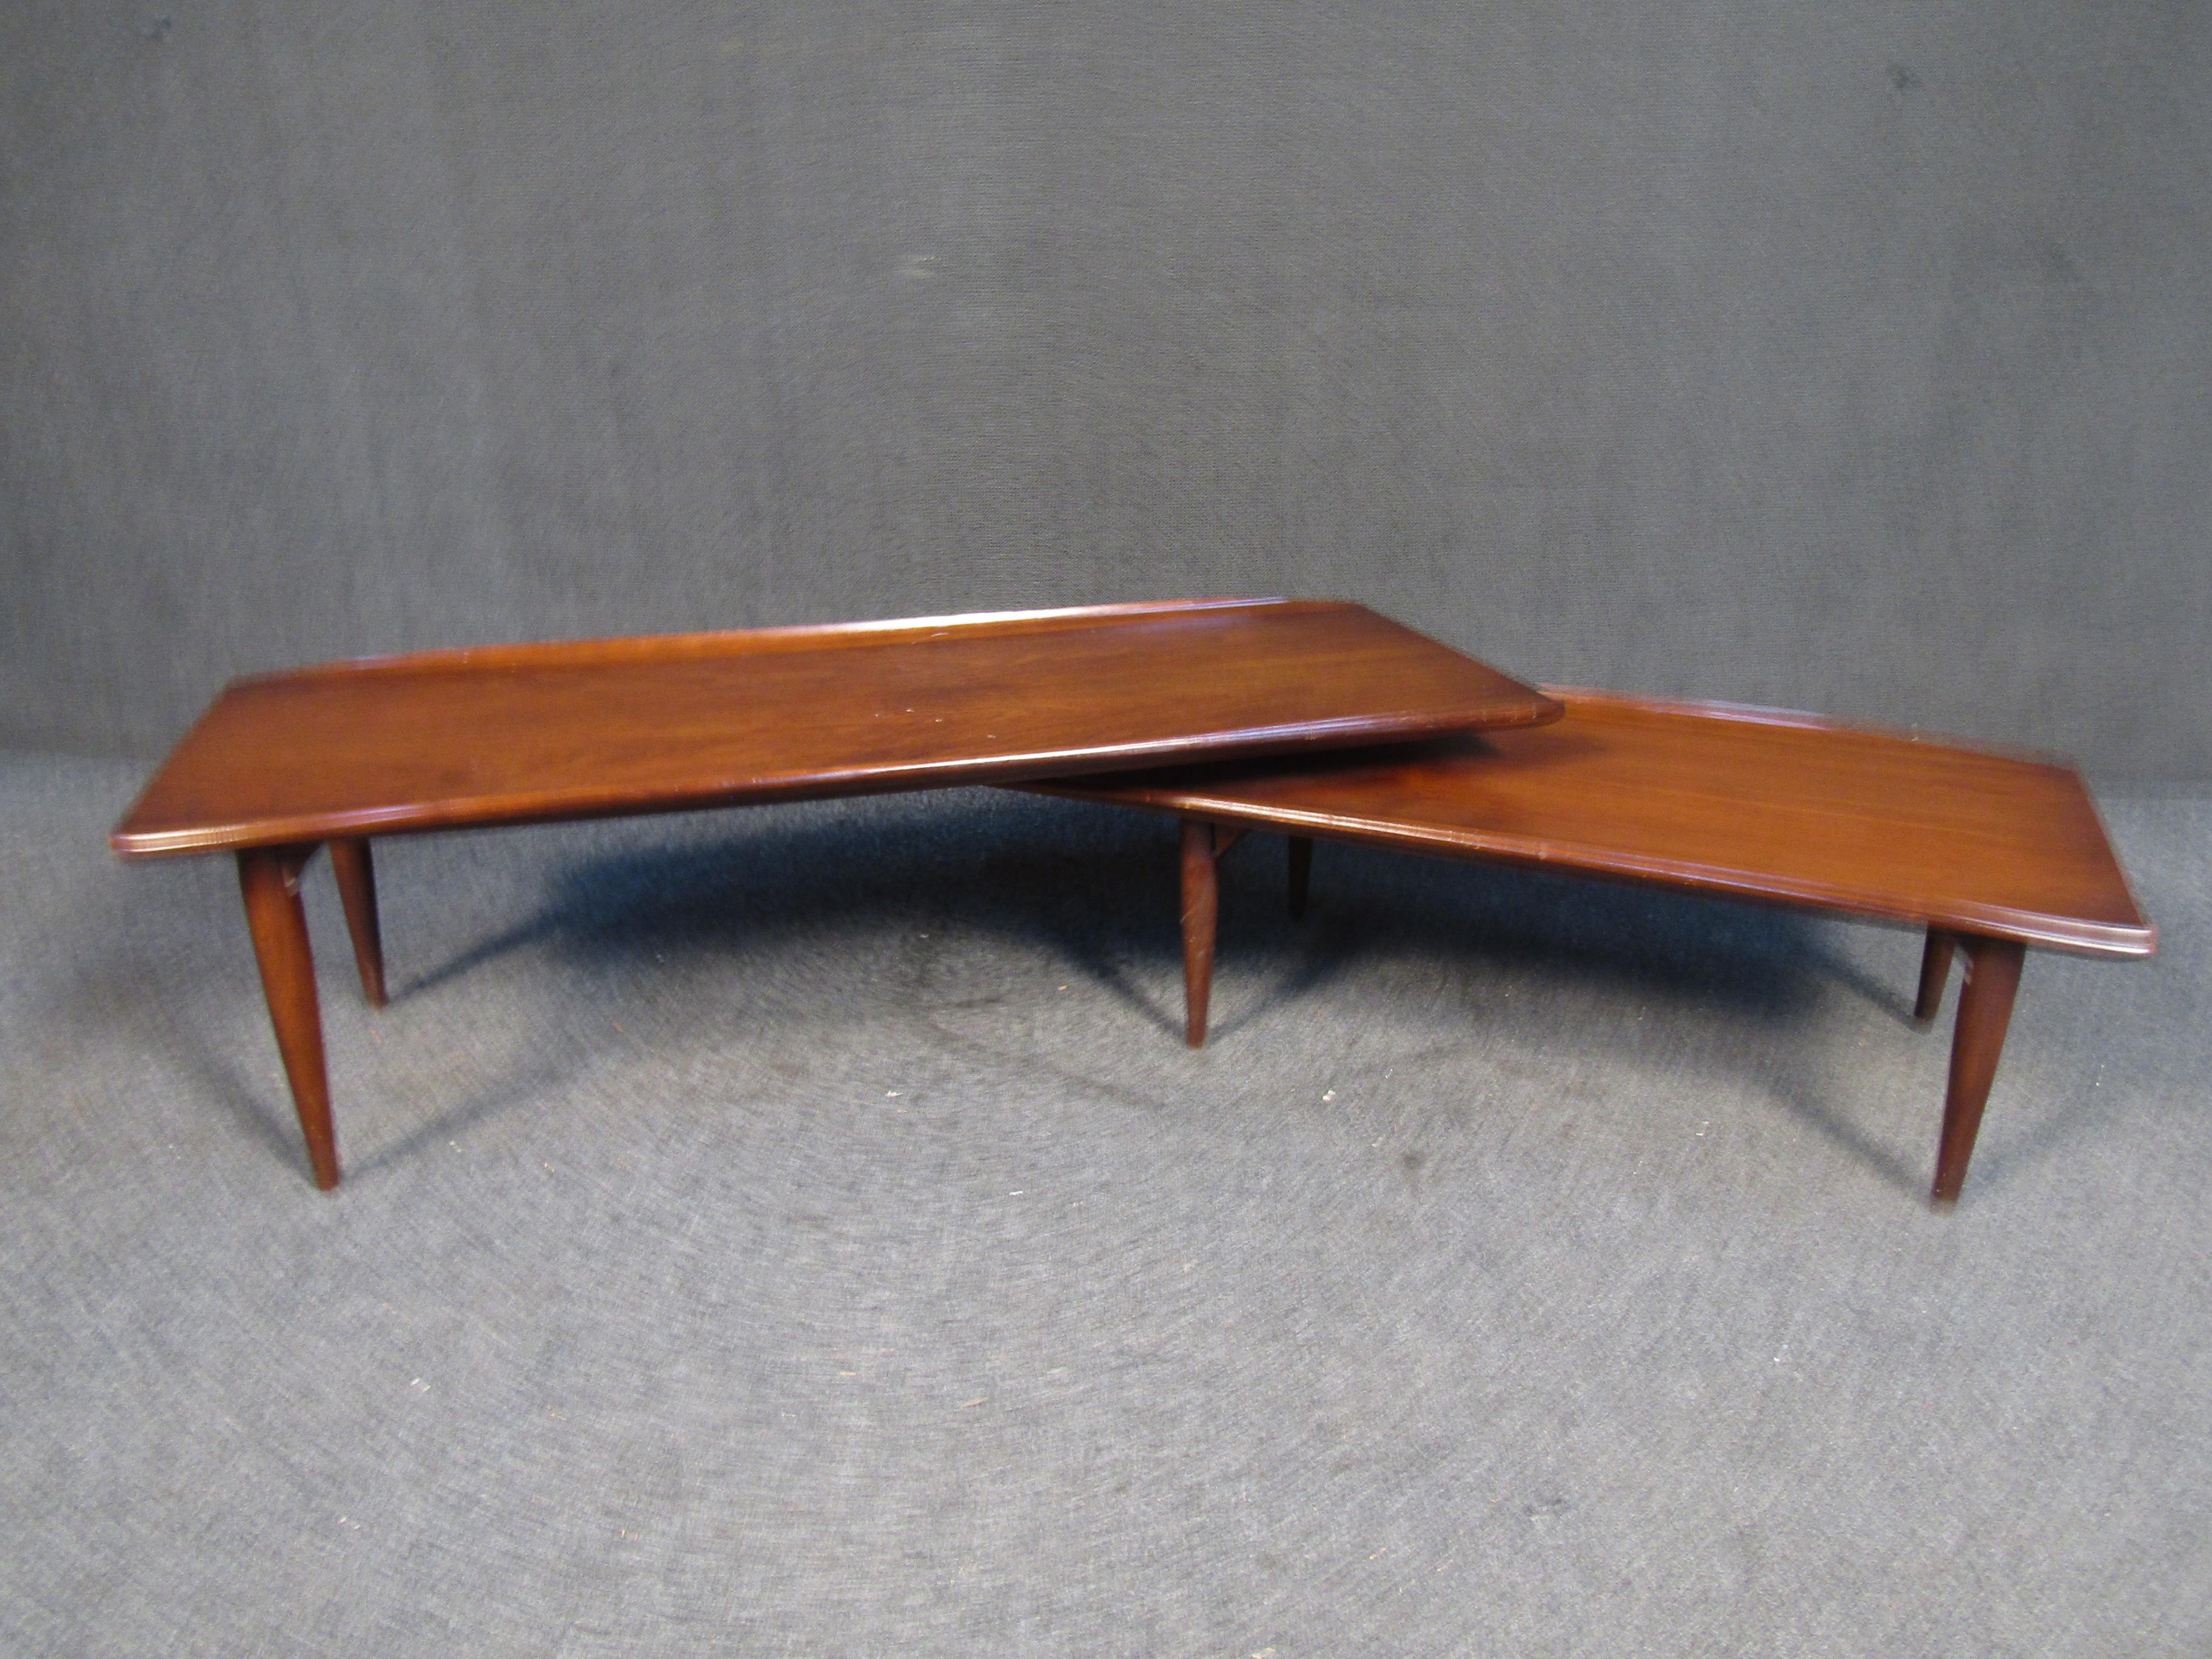 With a unique two-tiered swiveling design, this vintage coffee table can be adjusted to fit different spaces. Please confirm item location with seller (NY/NJ).